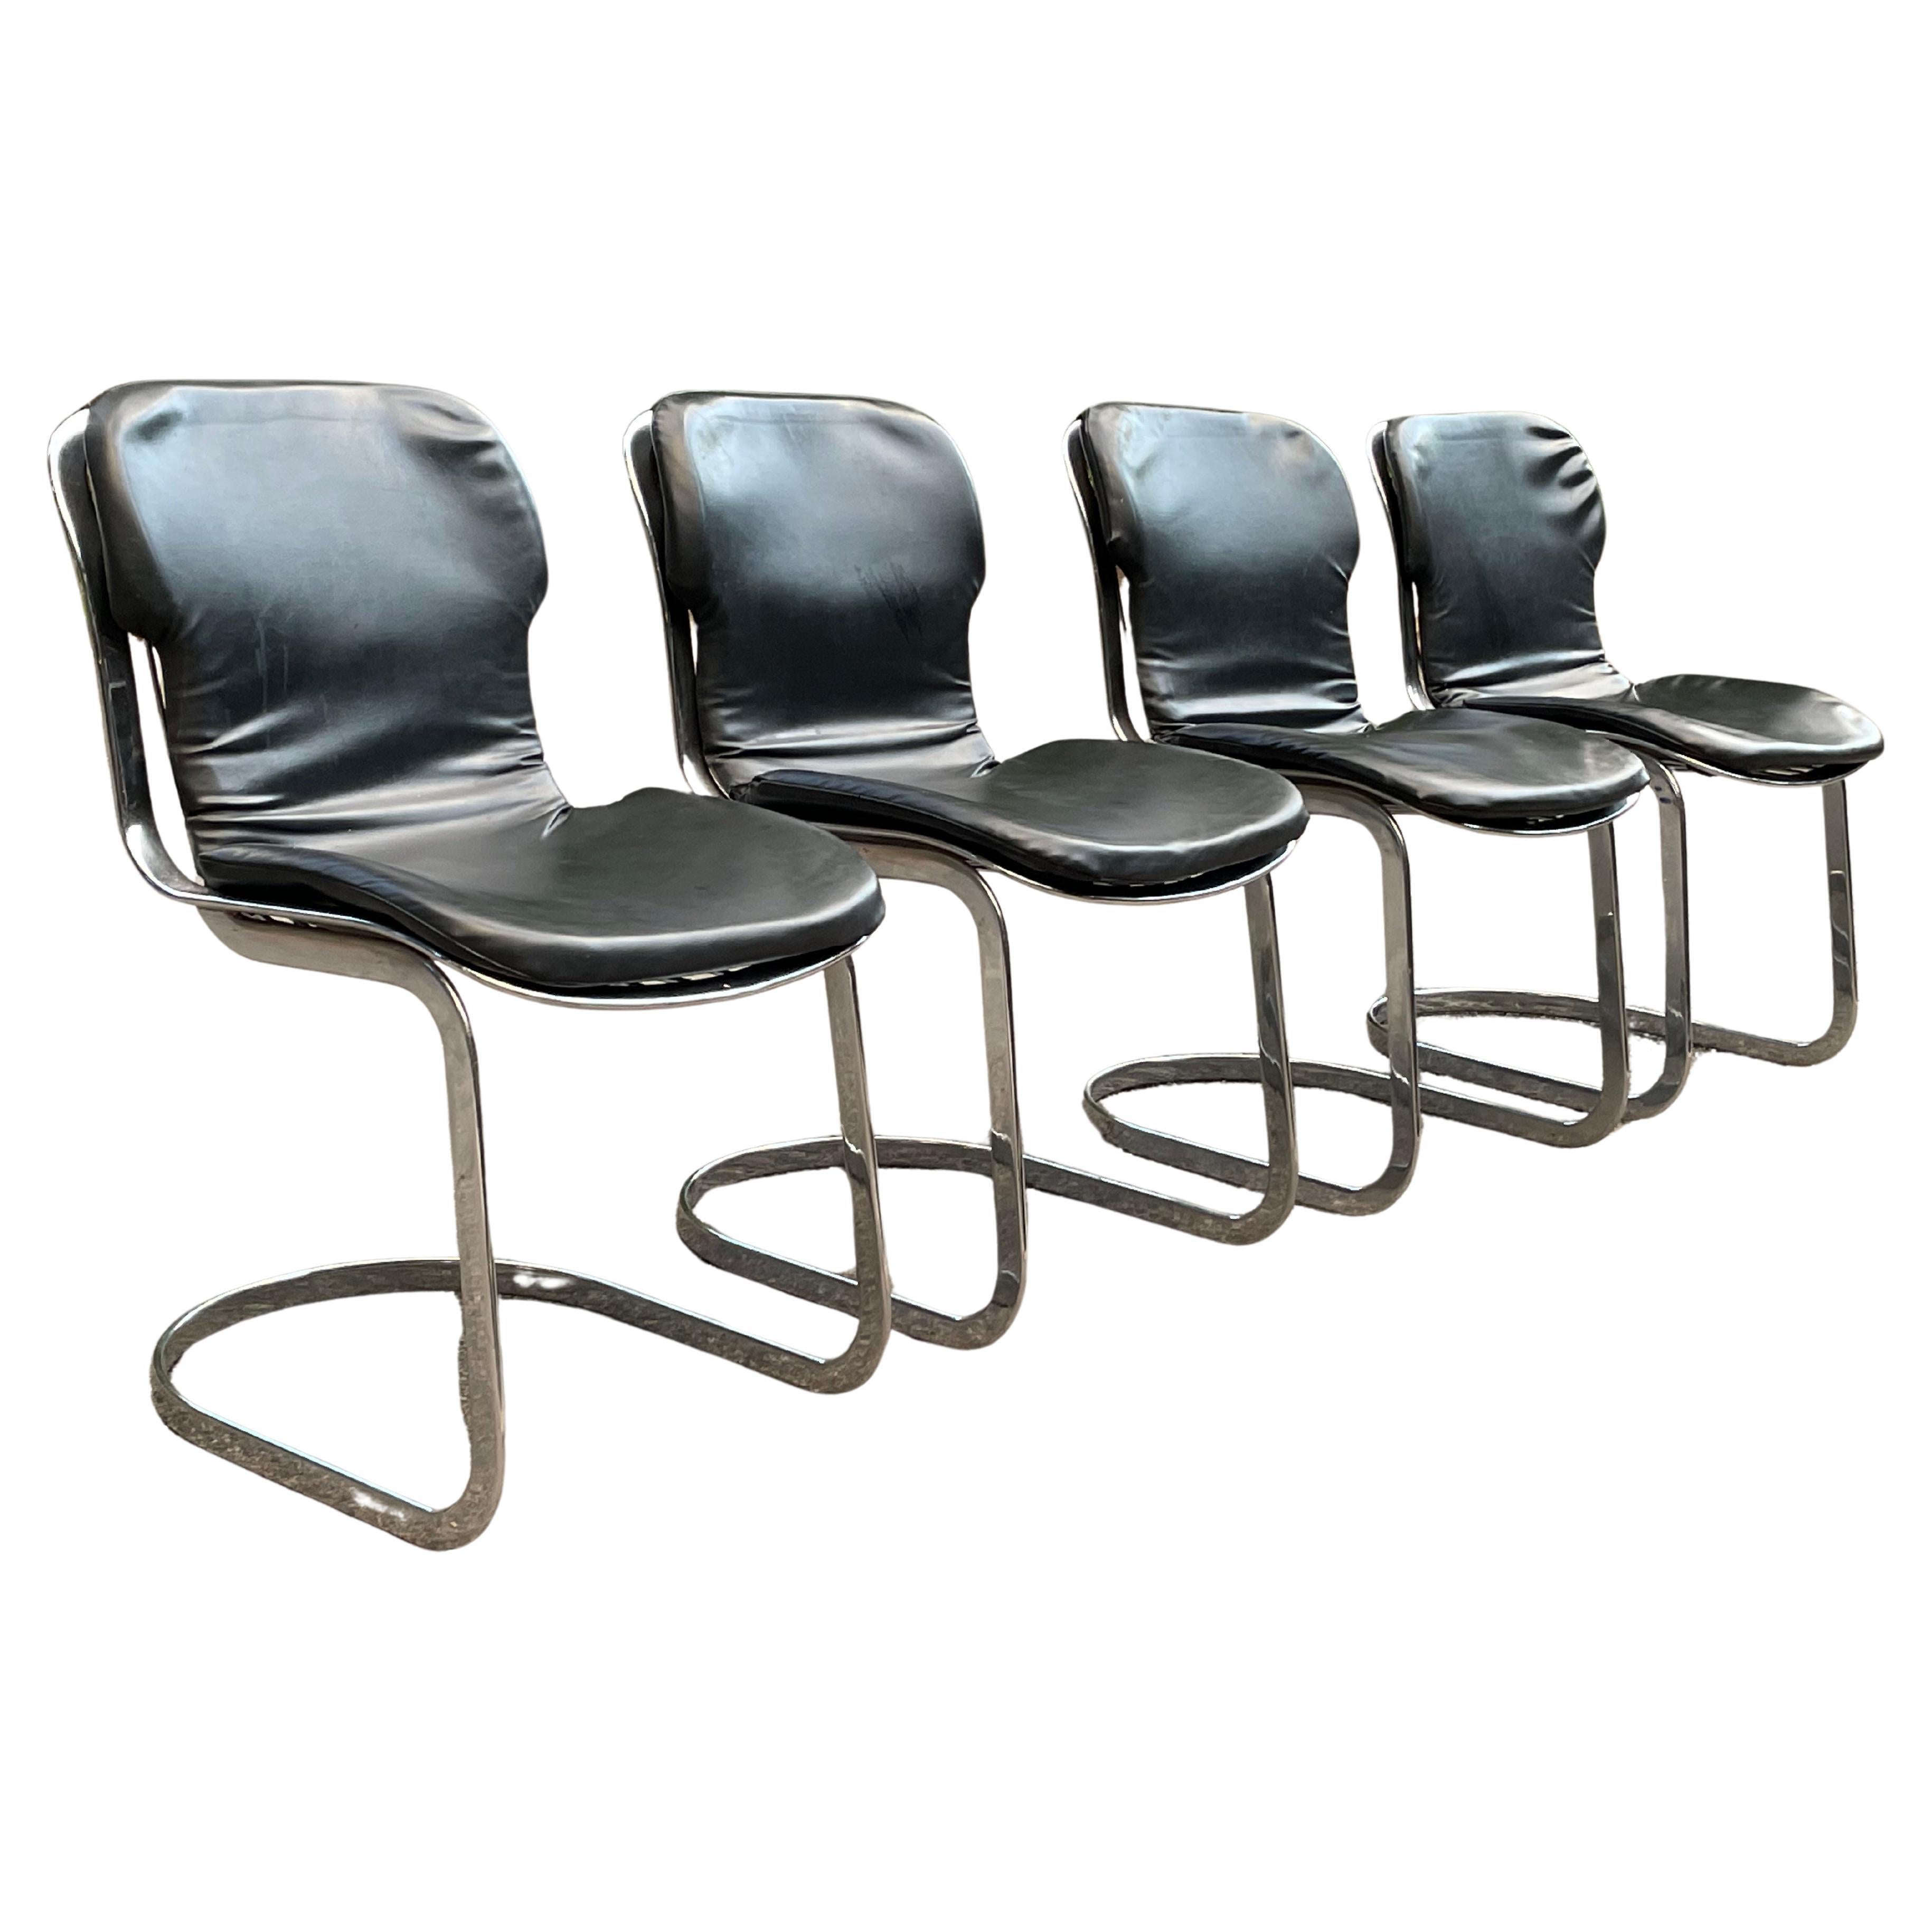 Set of (4) Vintage Mid Century 70's Willy Rizzo Chrome Dining Chairs for Cidue Elementi D’Arredo-Carre with matching Cidue table designed by Antonia Astori.

Made in Italy.
Chairs and Table are SIGNED with Cidue label under each. 

Table has a